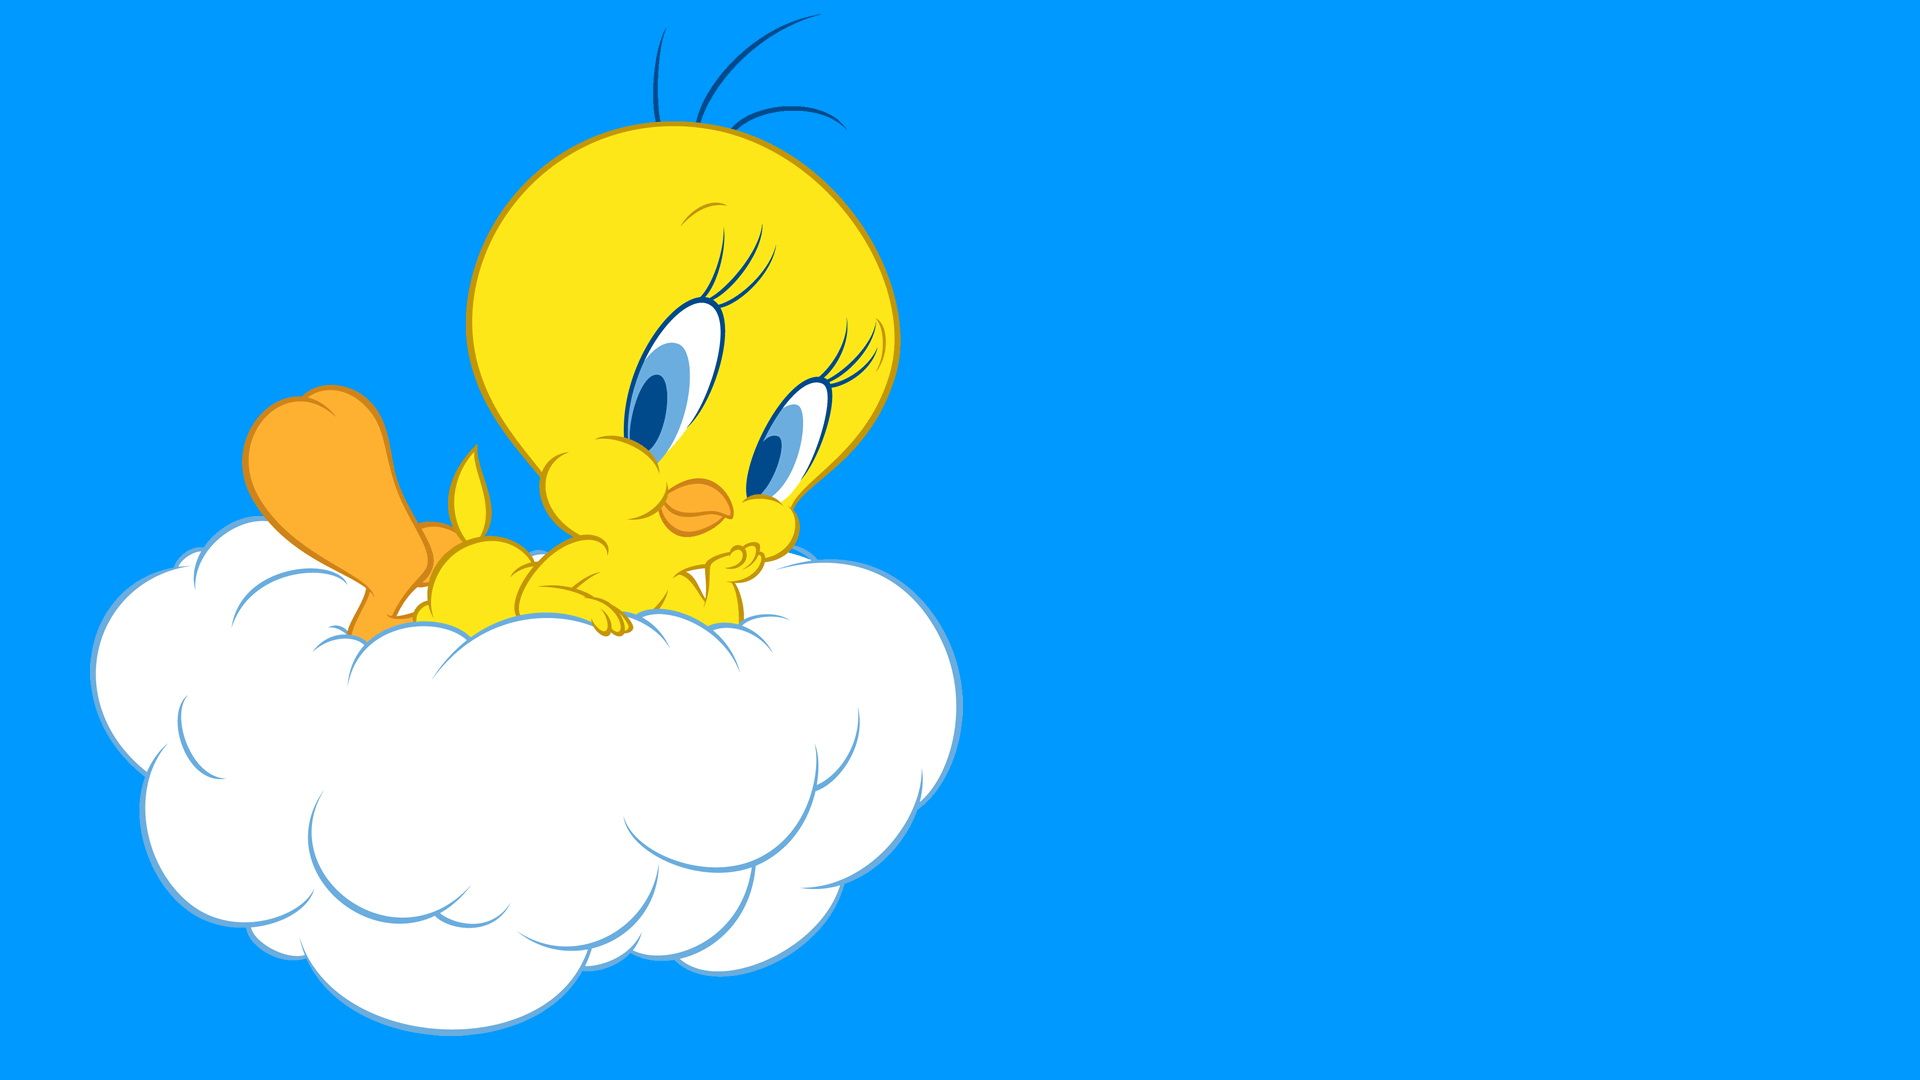 Tweety Wallpaper. Tweety Bird Wallpaper, Tweety Background and Gangster Tweety Wallpaper